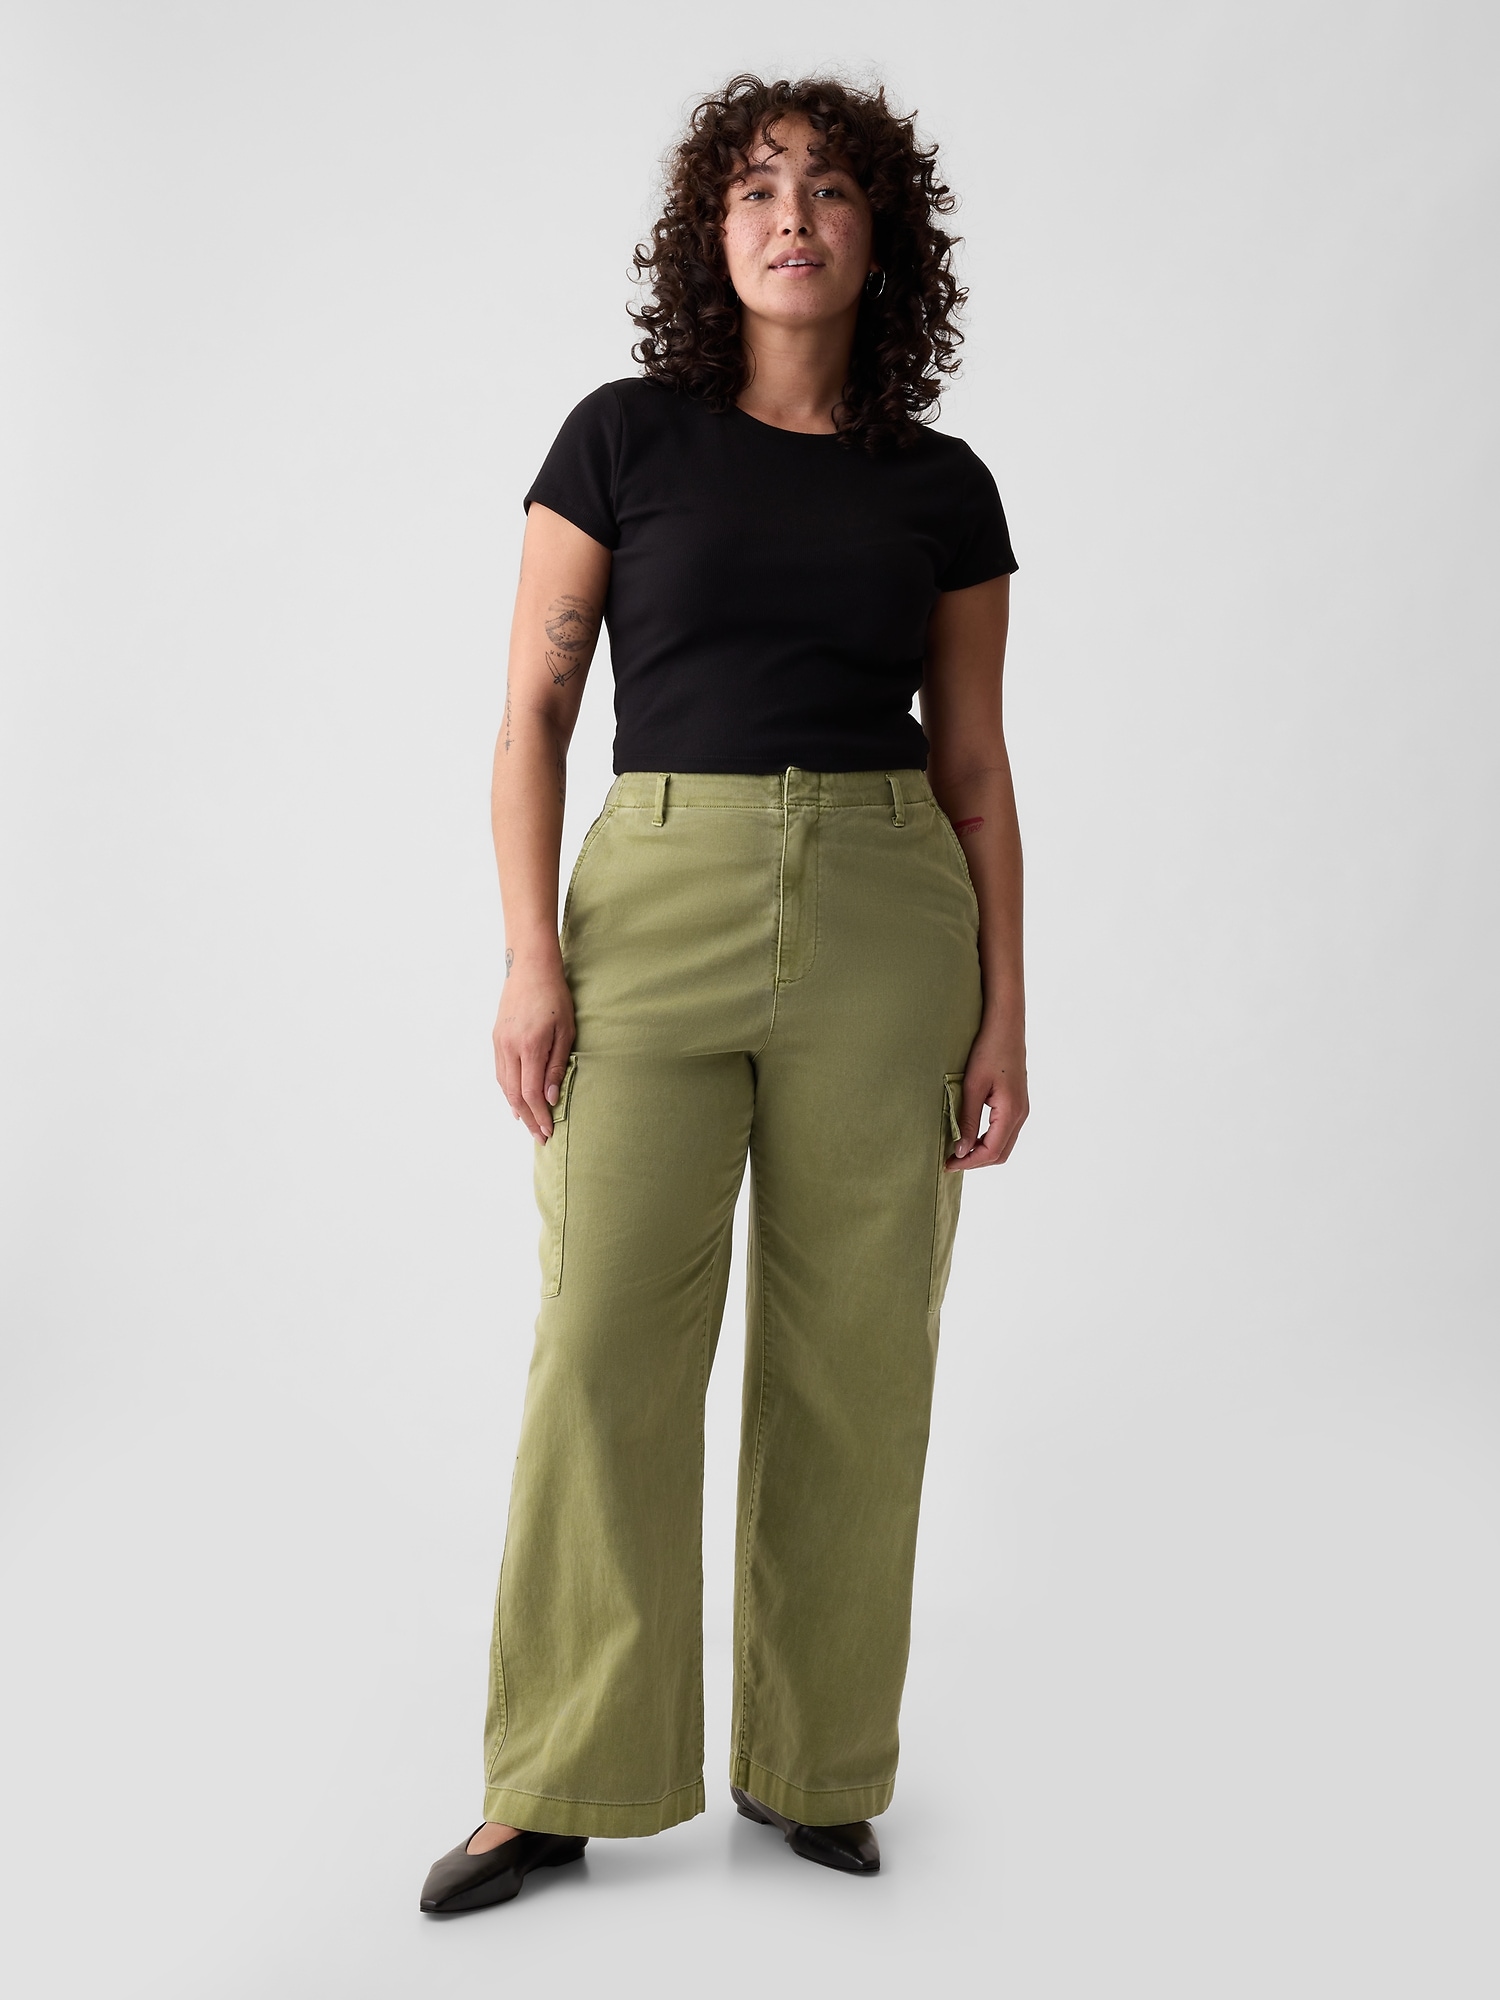  Mnyycxen Solid Cargo Pants for Women Loose Fit Comfy Sweatpants  Drawstring Stretch Ankle Pants Hiking Trend Pants with Pocket 3X-Large  Gabardina Impermeable Hombre Green : Clothing, Shoes & Jewelry